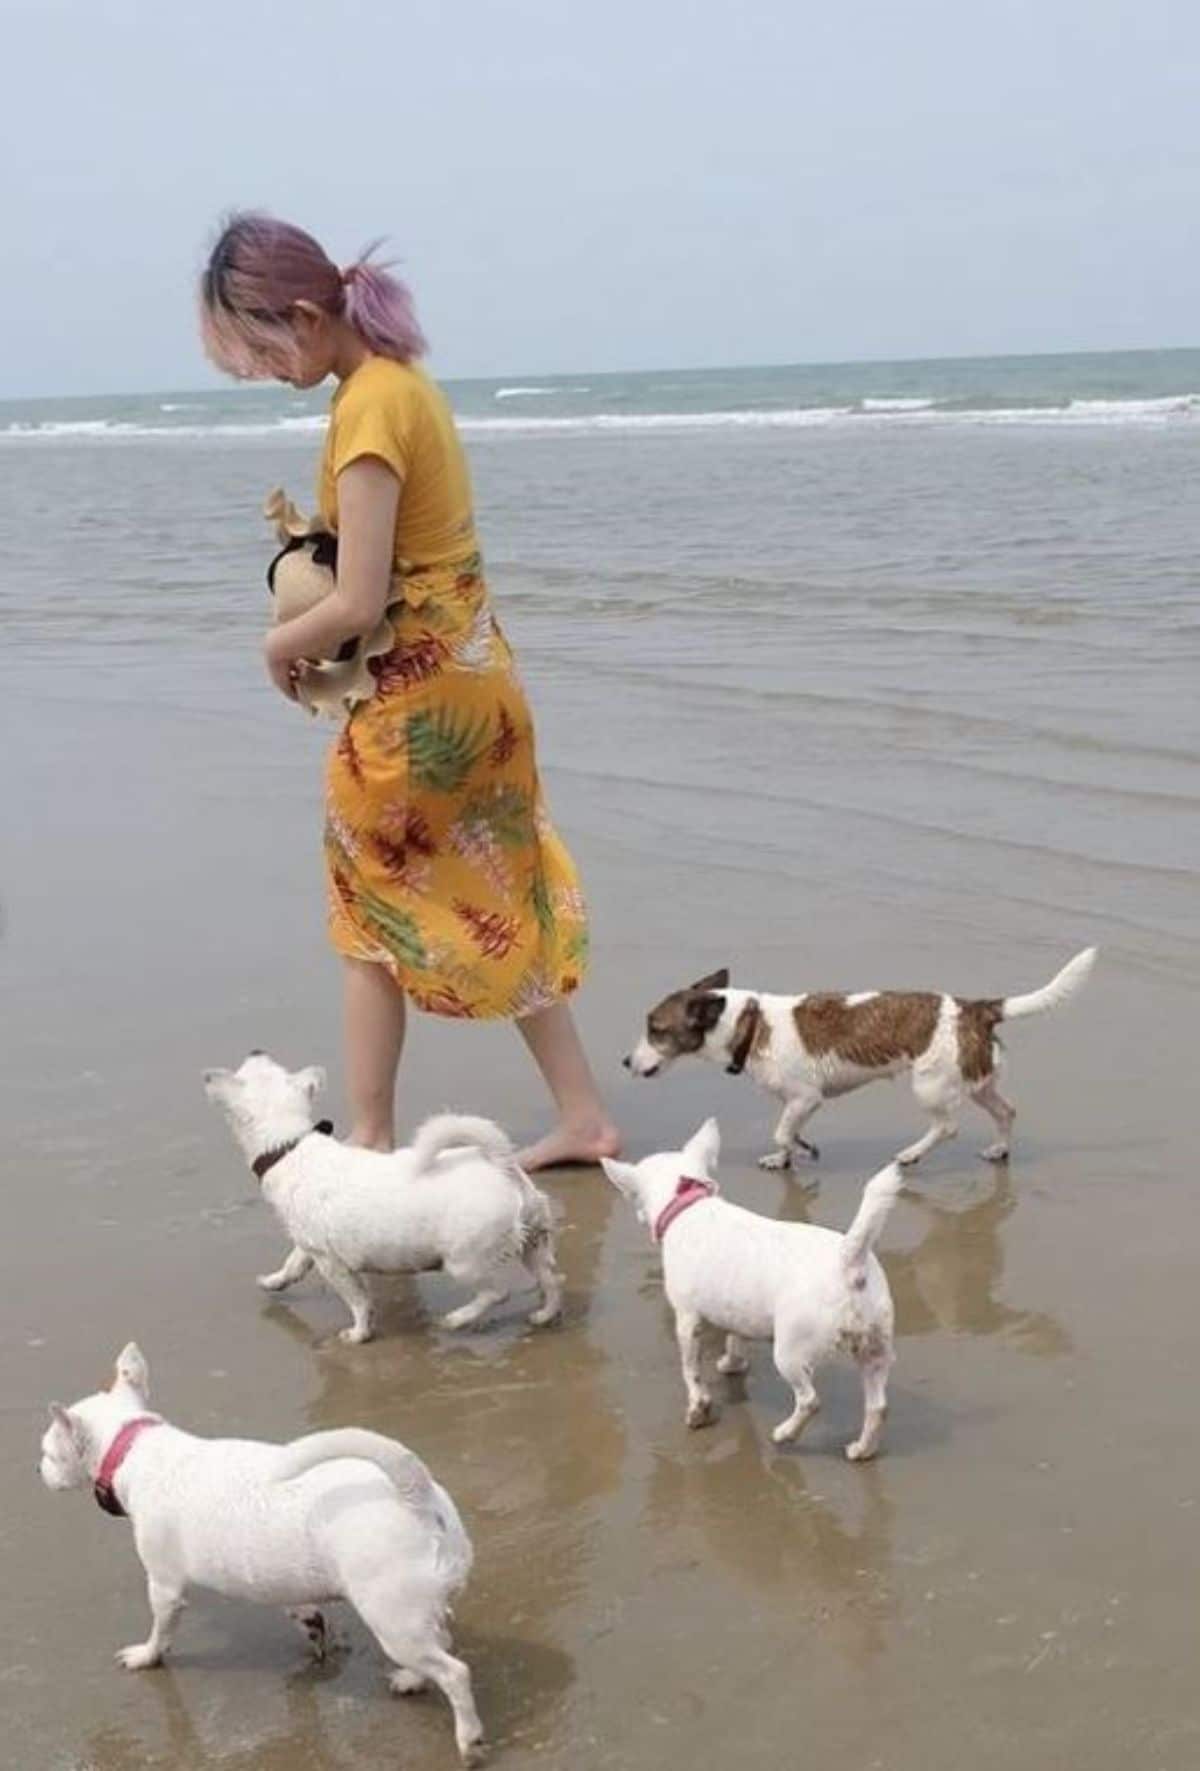 woman dressed in yellow with 3 white dogs and 1 white and brown dog behind her on the beach